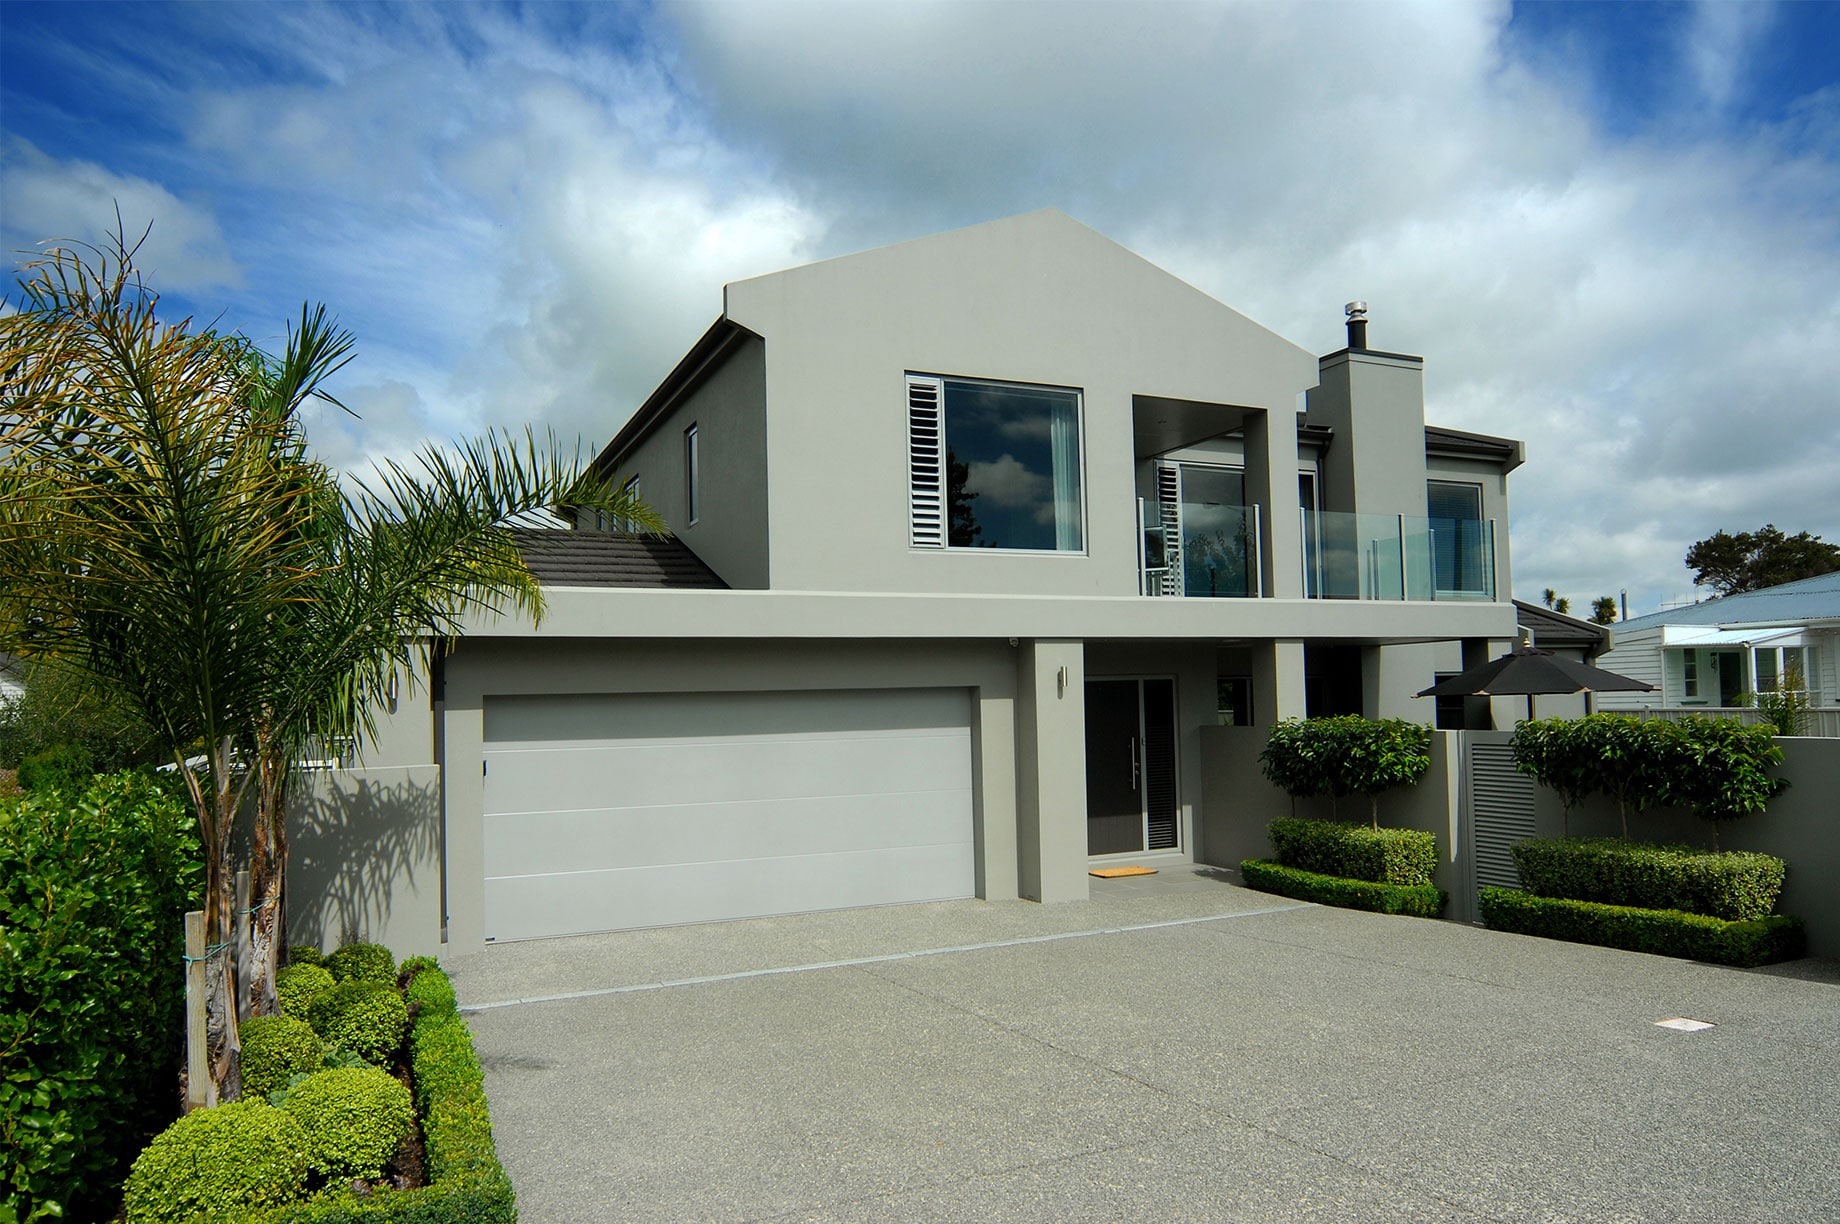 Large grey two storey house exterior